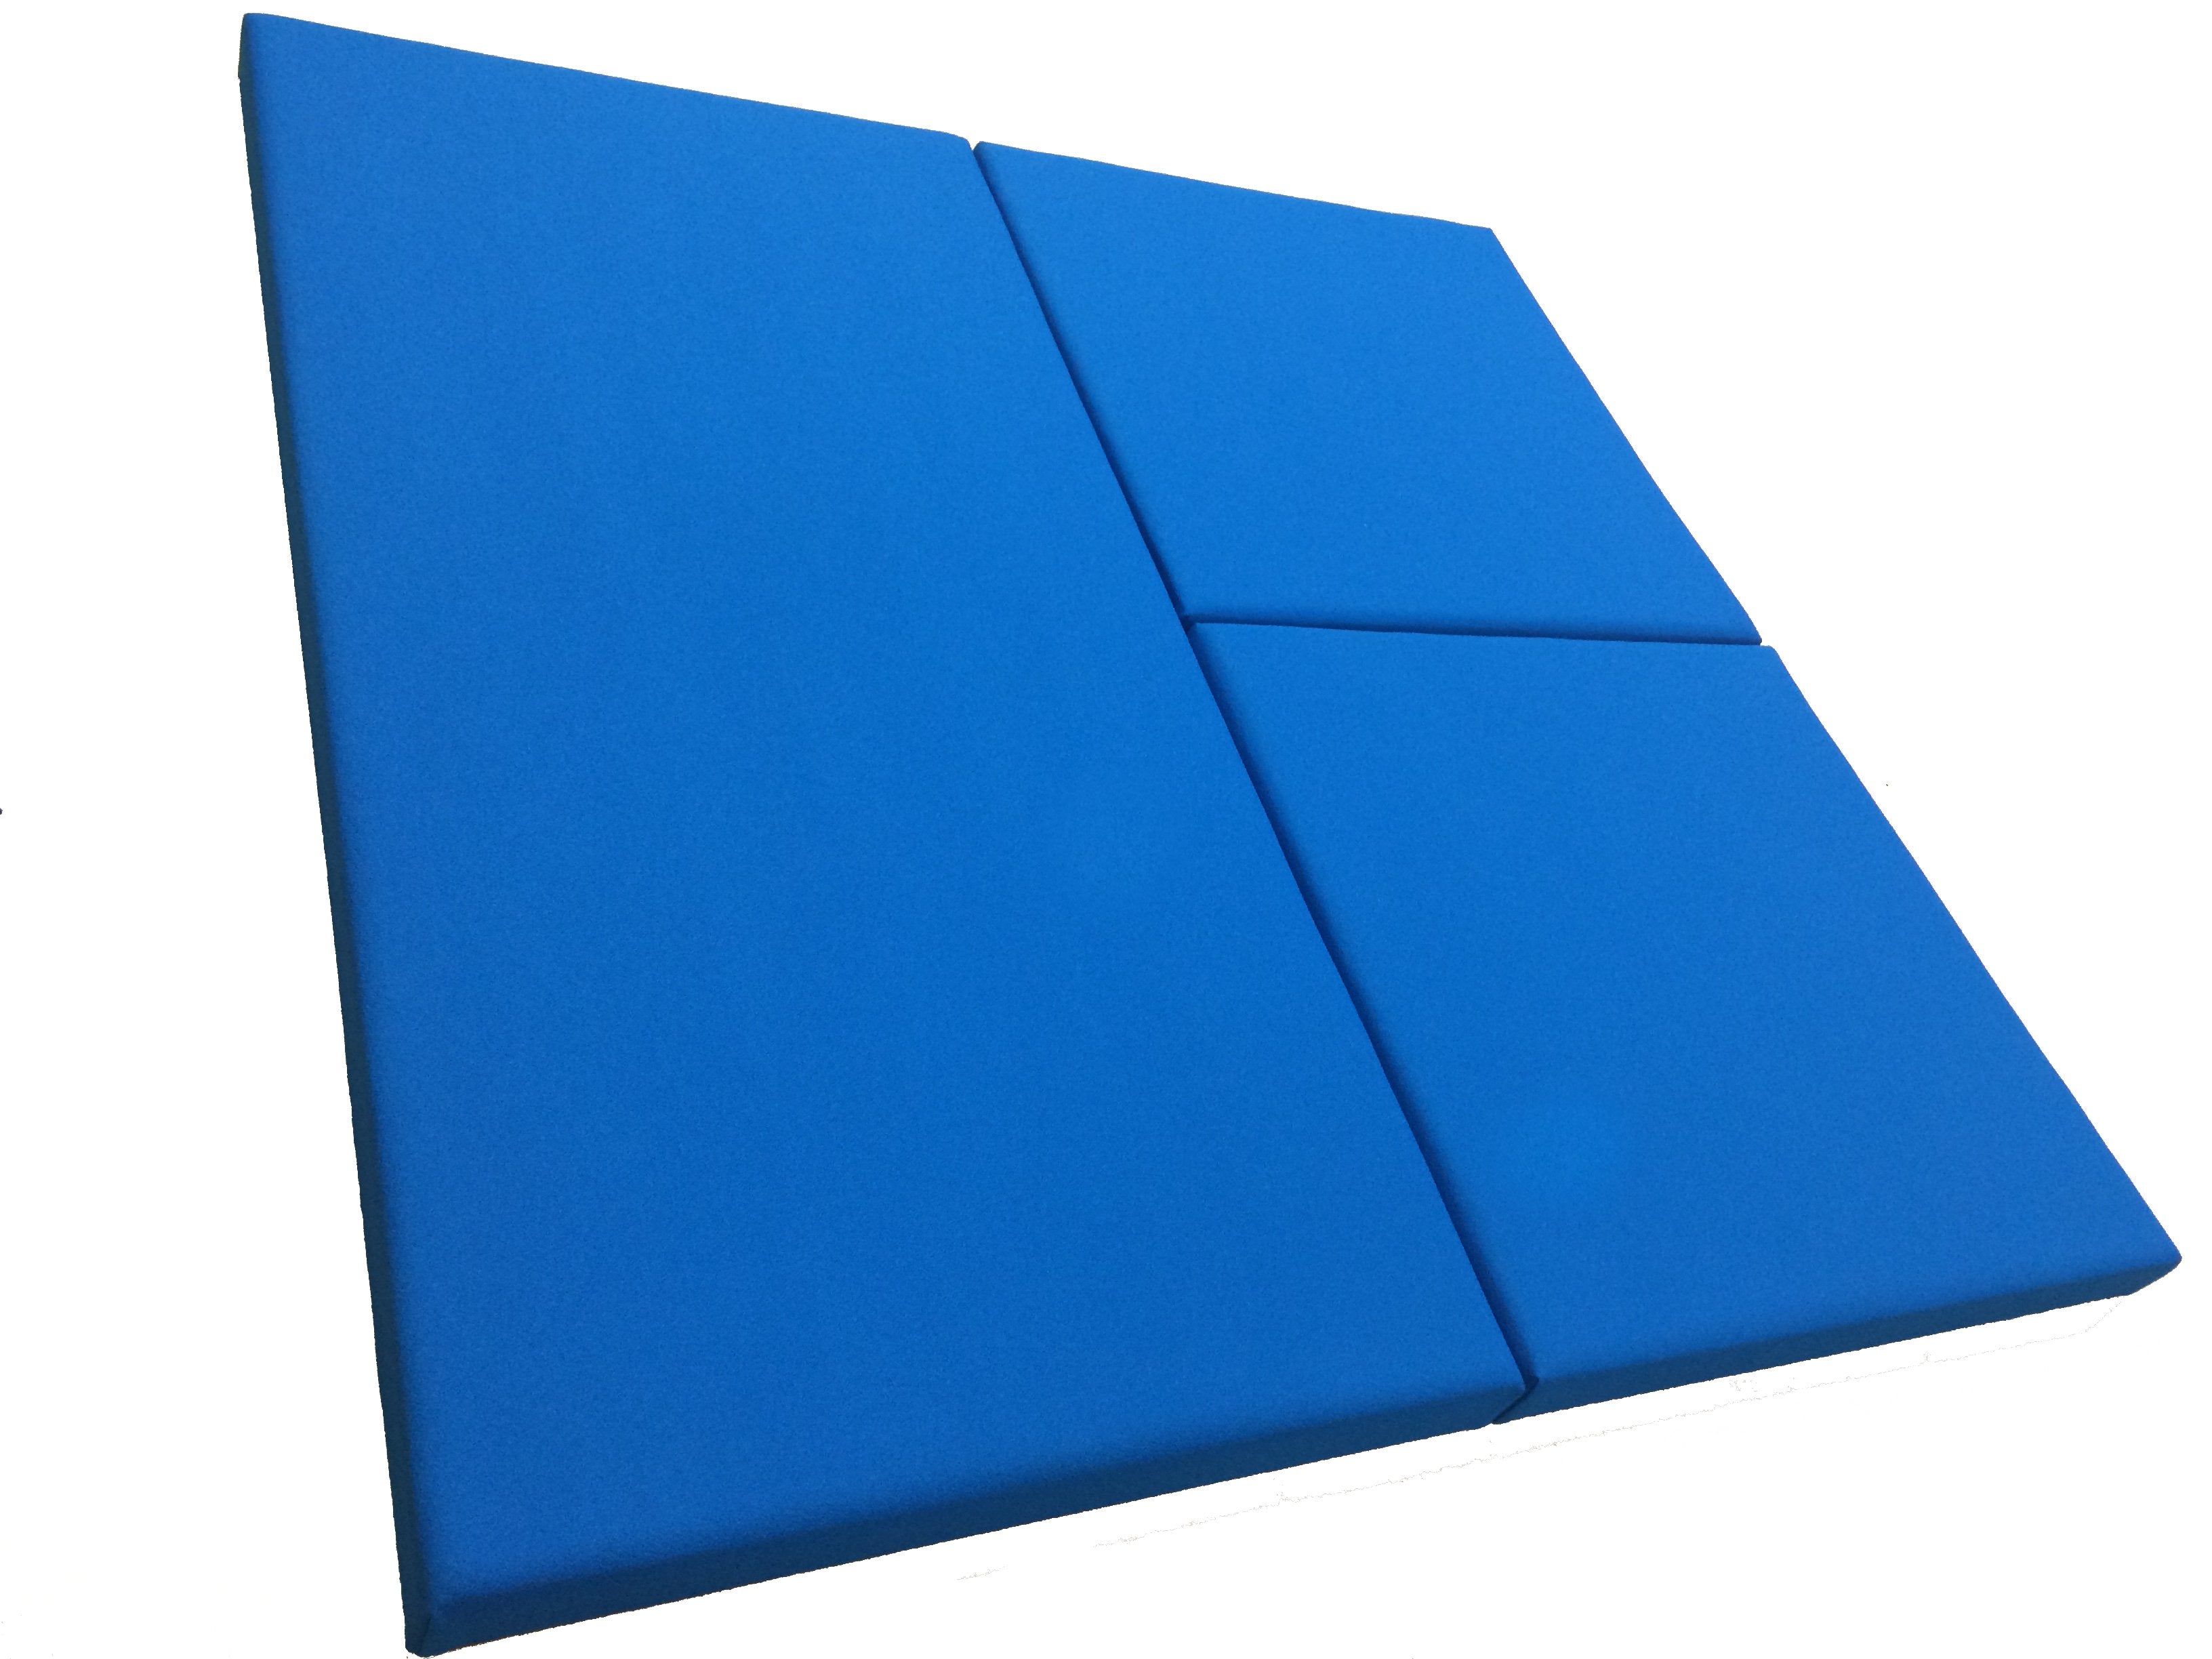 1" SoundControl Ceiling Suspended Acoustic Panel 2ft by 4ft - Advanced Acoustics